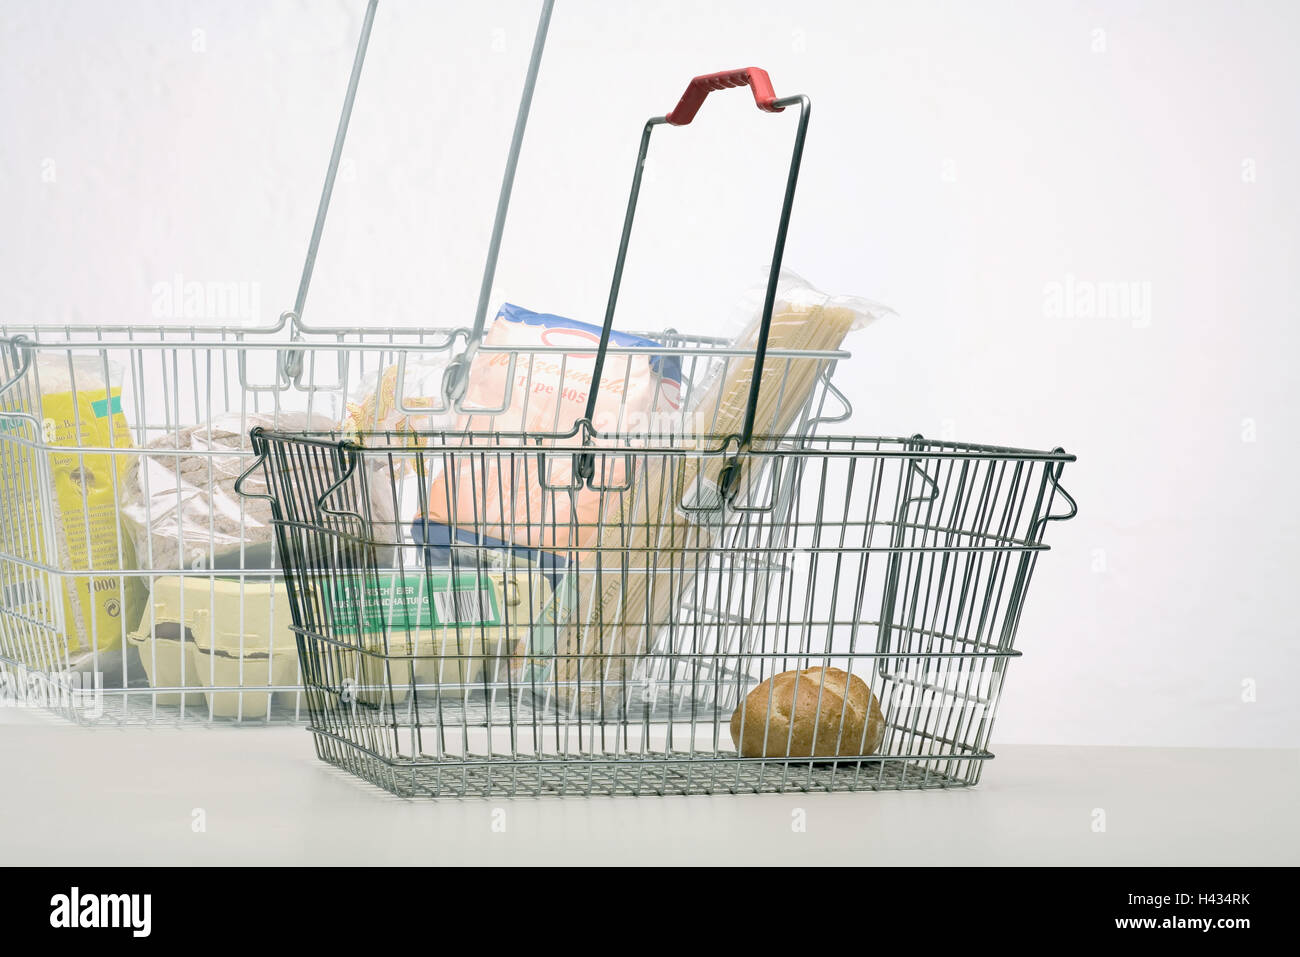 Purchase-baskets, content, quantity, differently, [M], baskets, metal-baskets, metal, food, full, empty, symbol, buying power, buying power-decrease, depreciation, sales tax-increase, tax-increase, value added tax-increase, concept, shopping, storage, tra Stock Photo